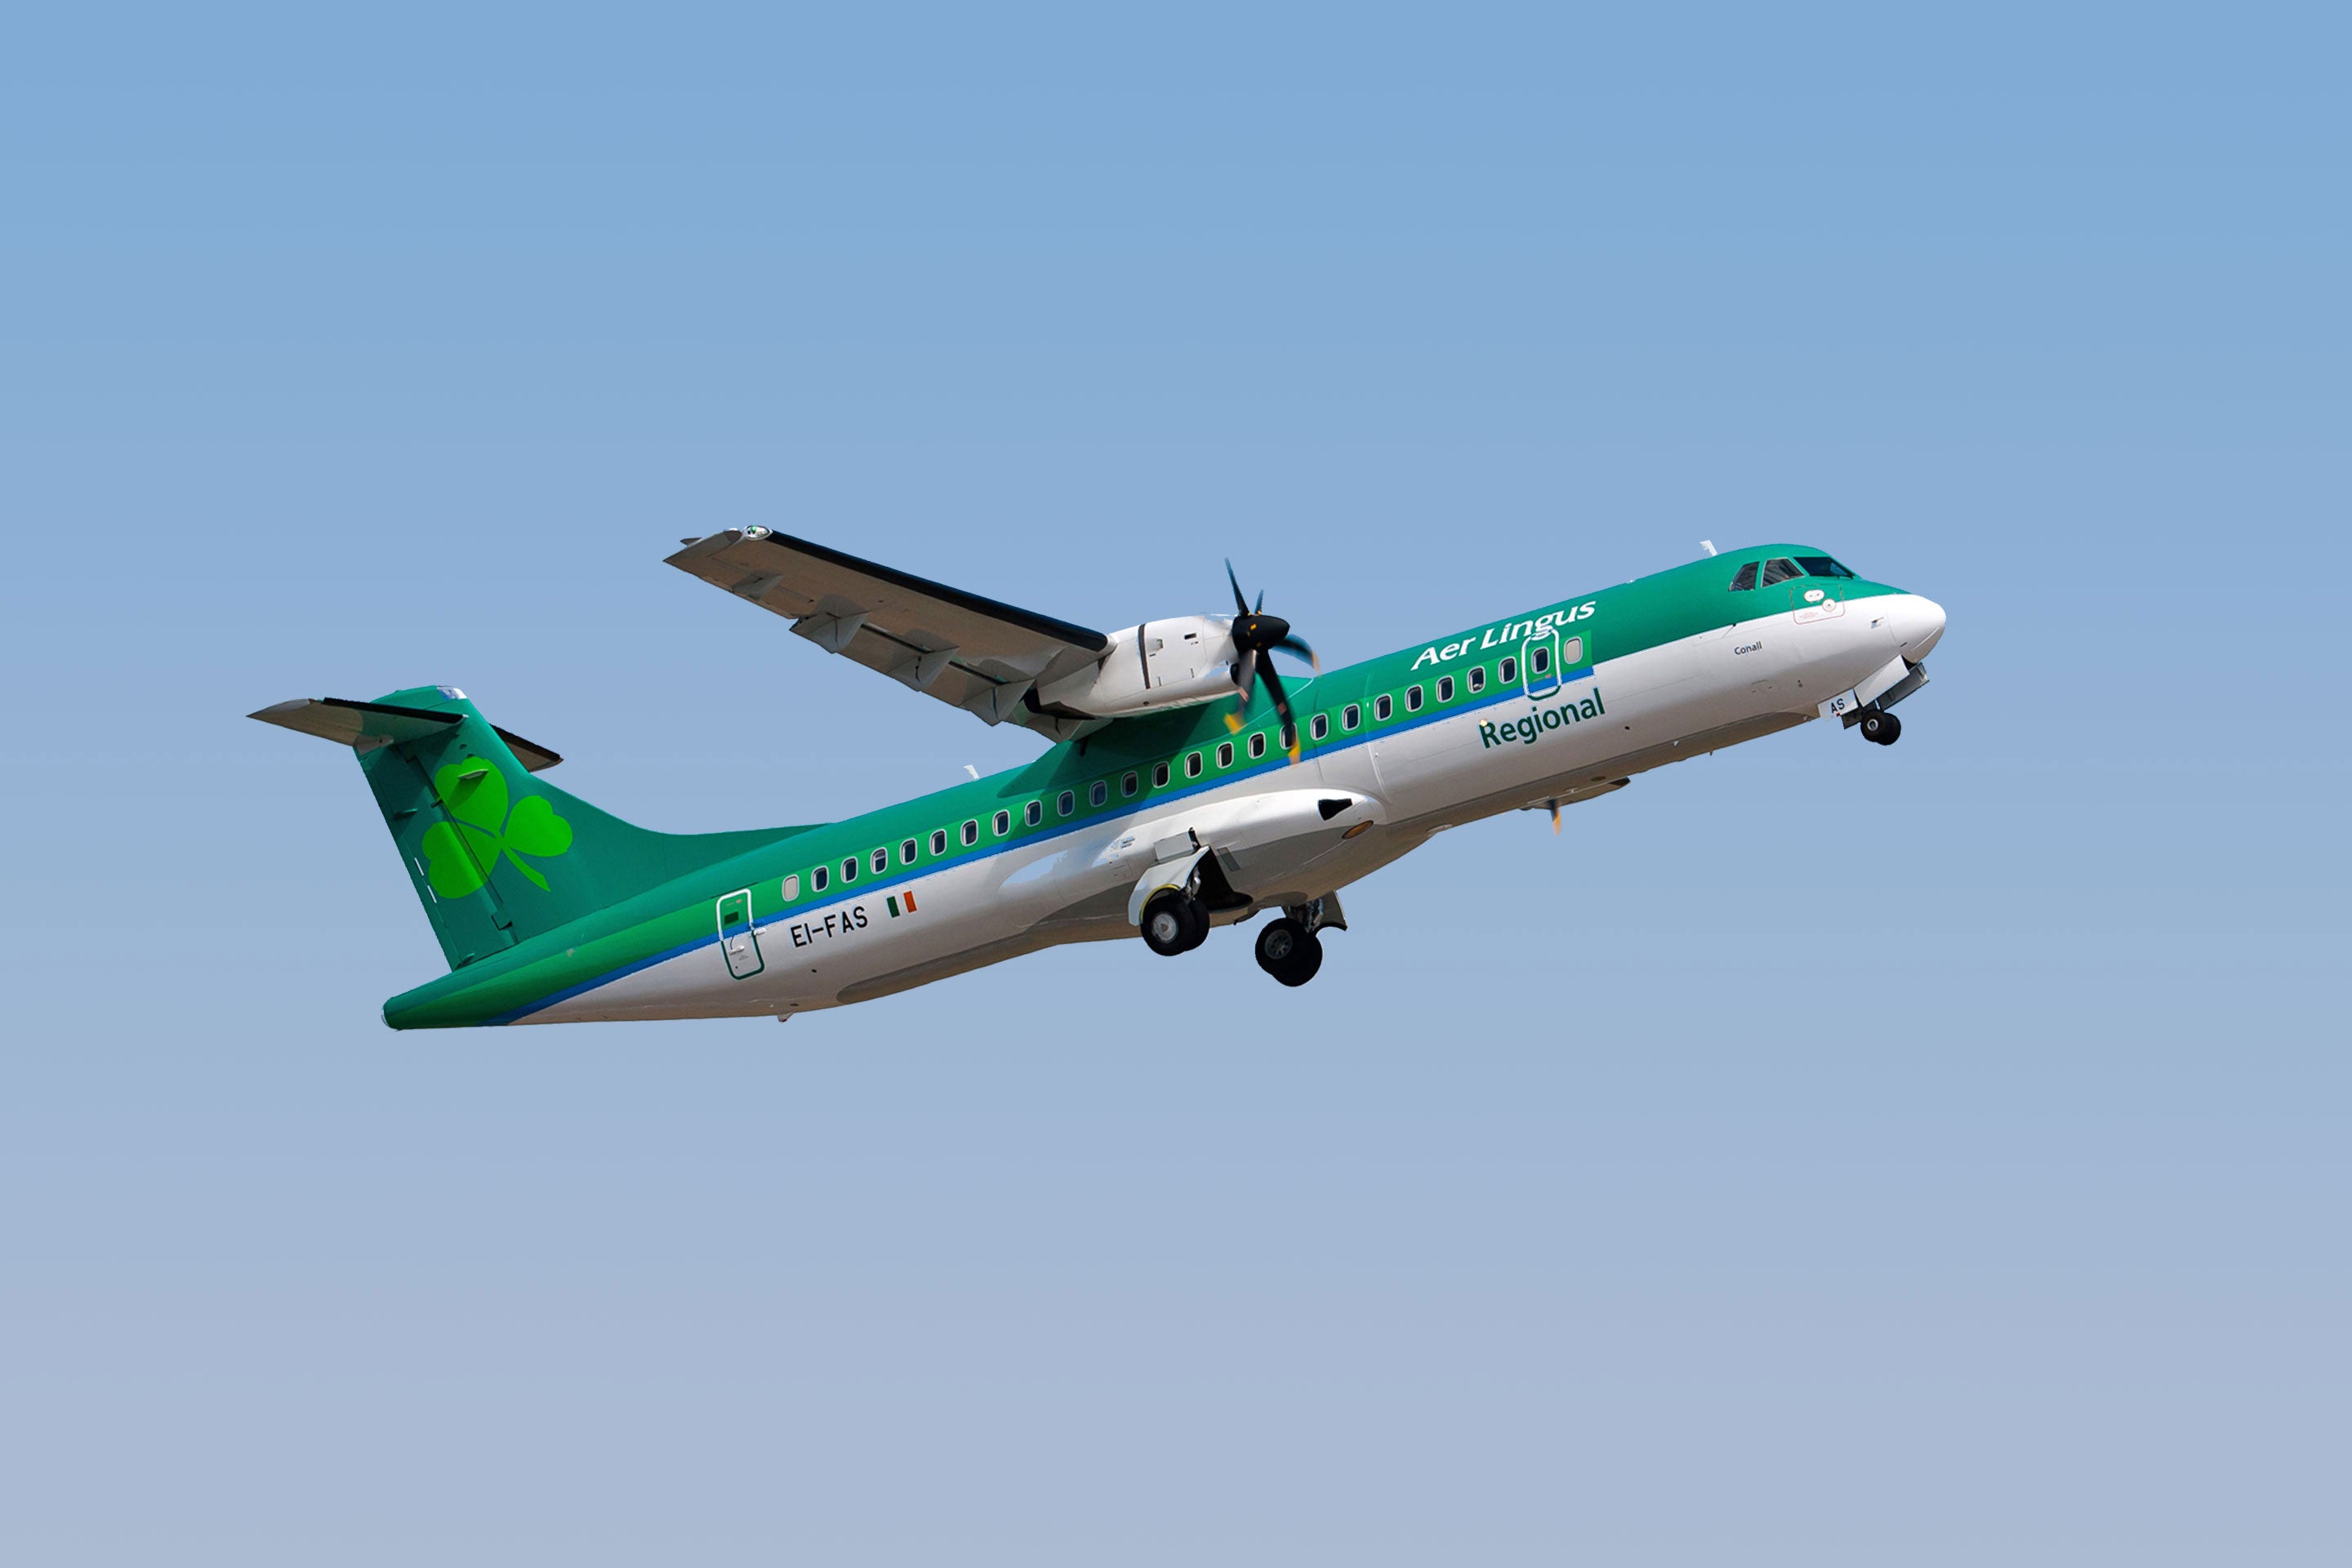 Now departed: Stobart Air plane in the colours of Aer Lingus Regional